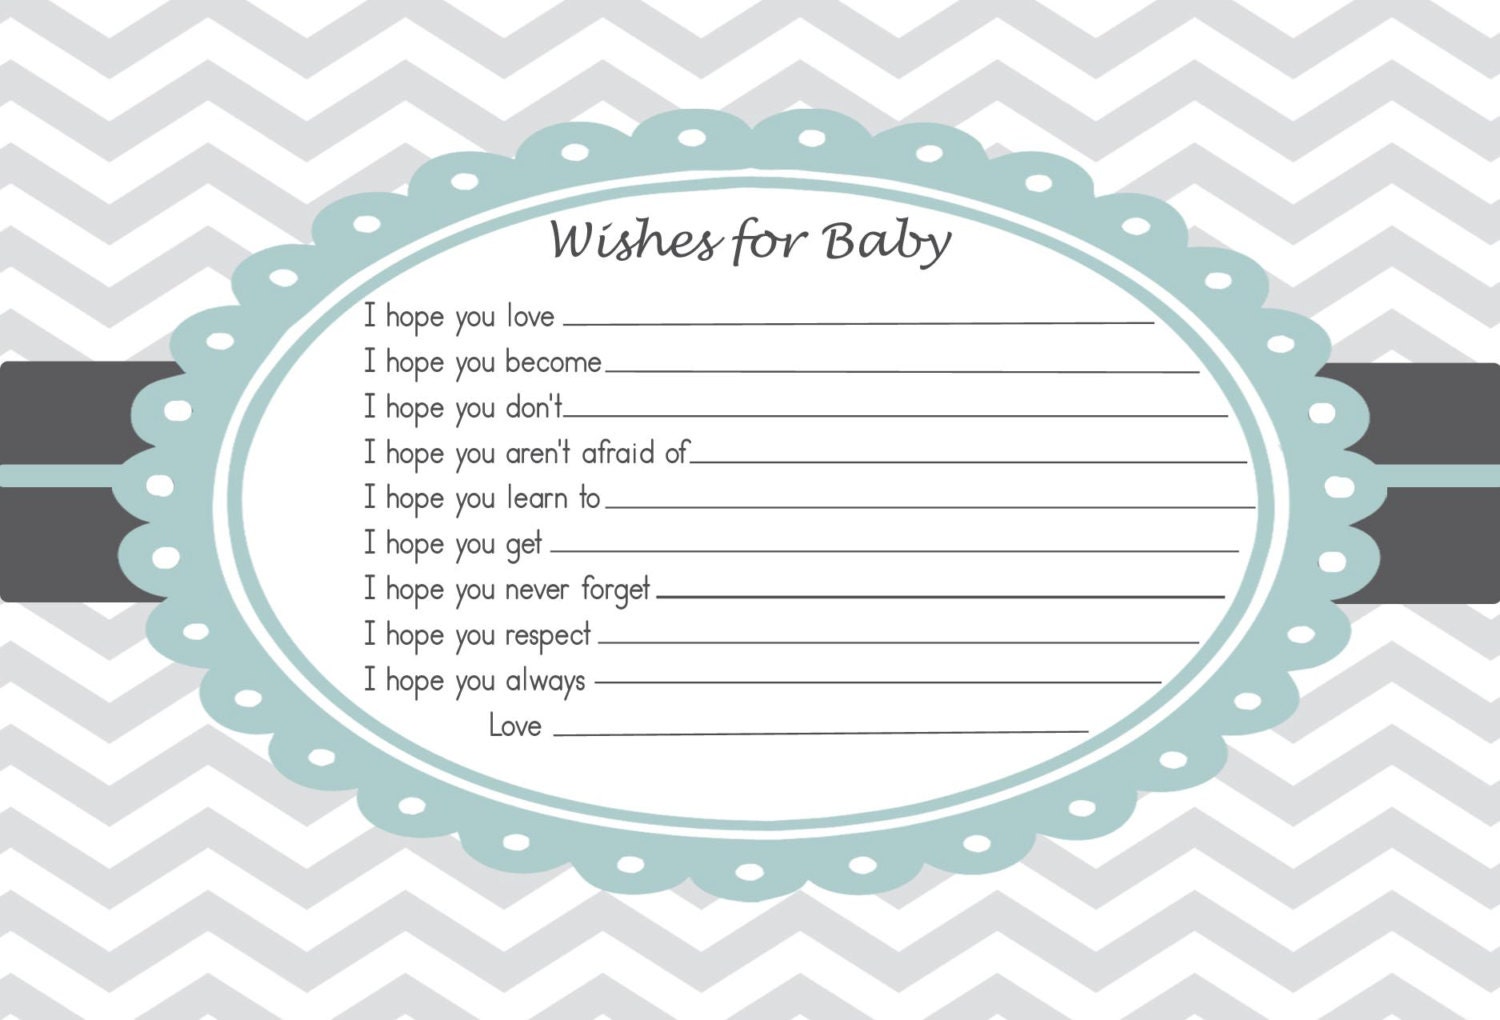 baby-shower-advice-card-wishes-for-the-baby-by-rockstarpress